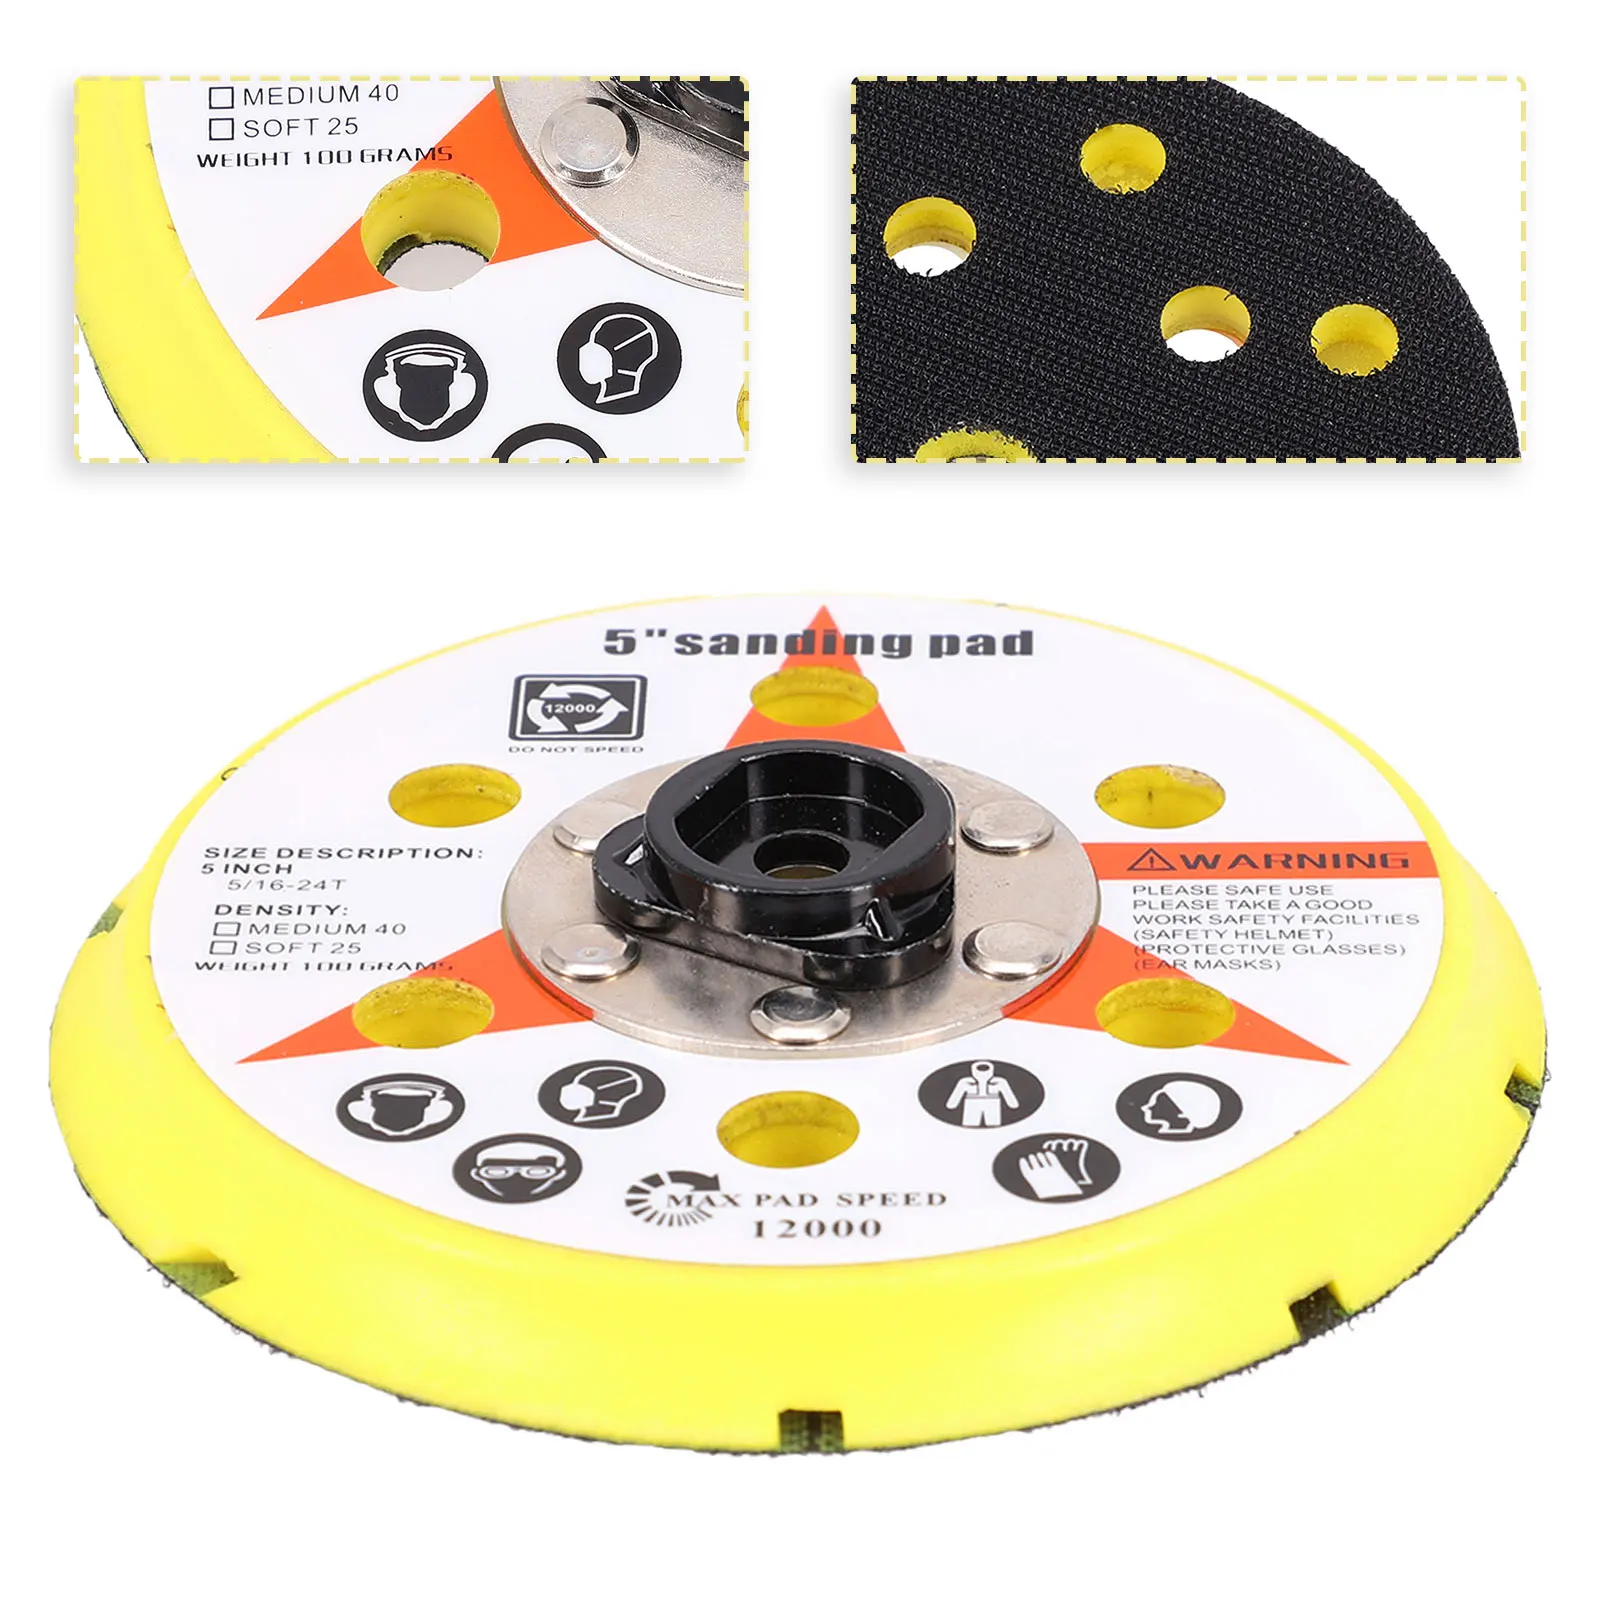 

1pcs 125mm Sanding Pad Polishing Backing Plate Hook And Loop For DA Polisher Self Adhesive Back Plate With Heat Emission Holes